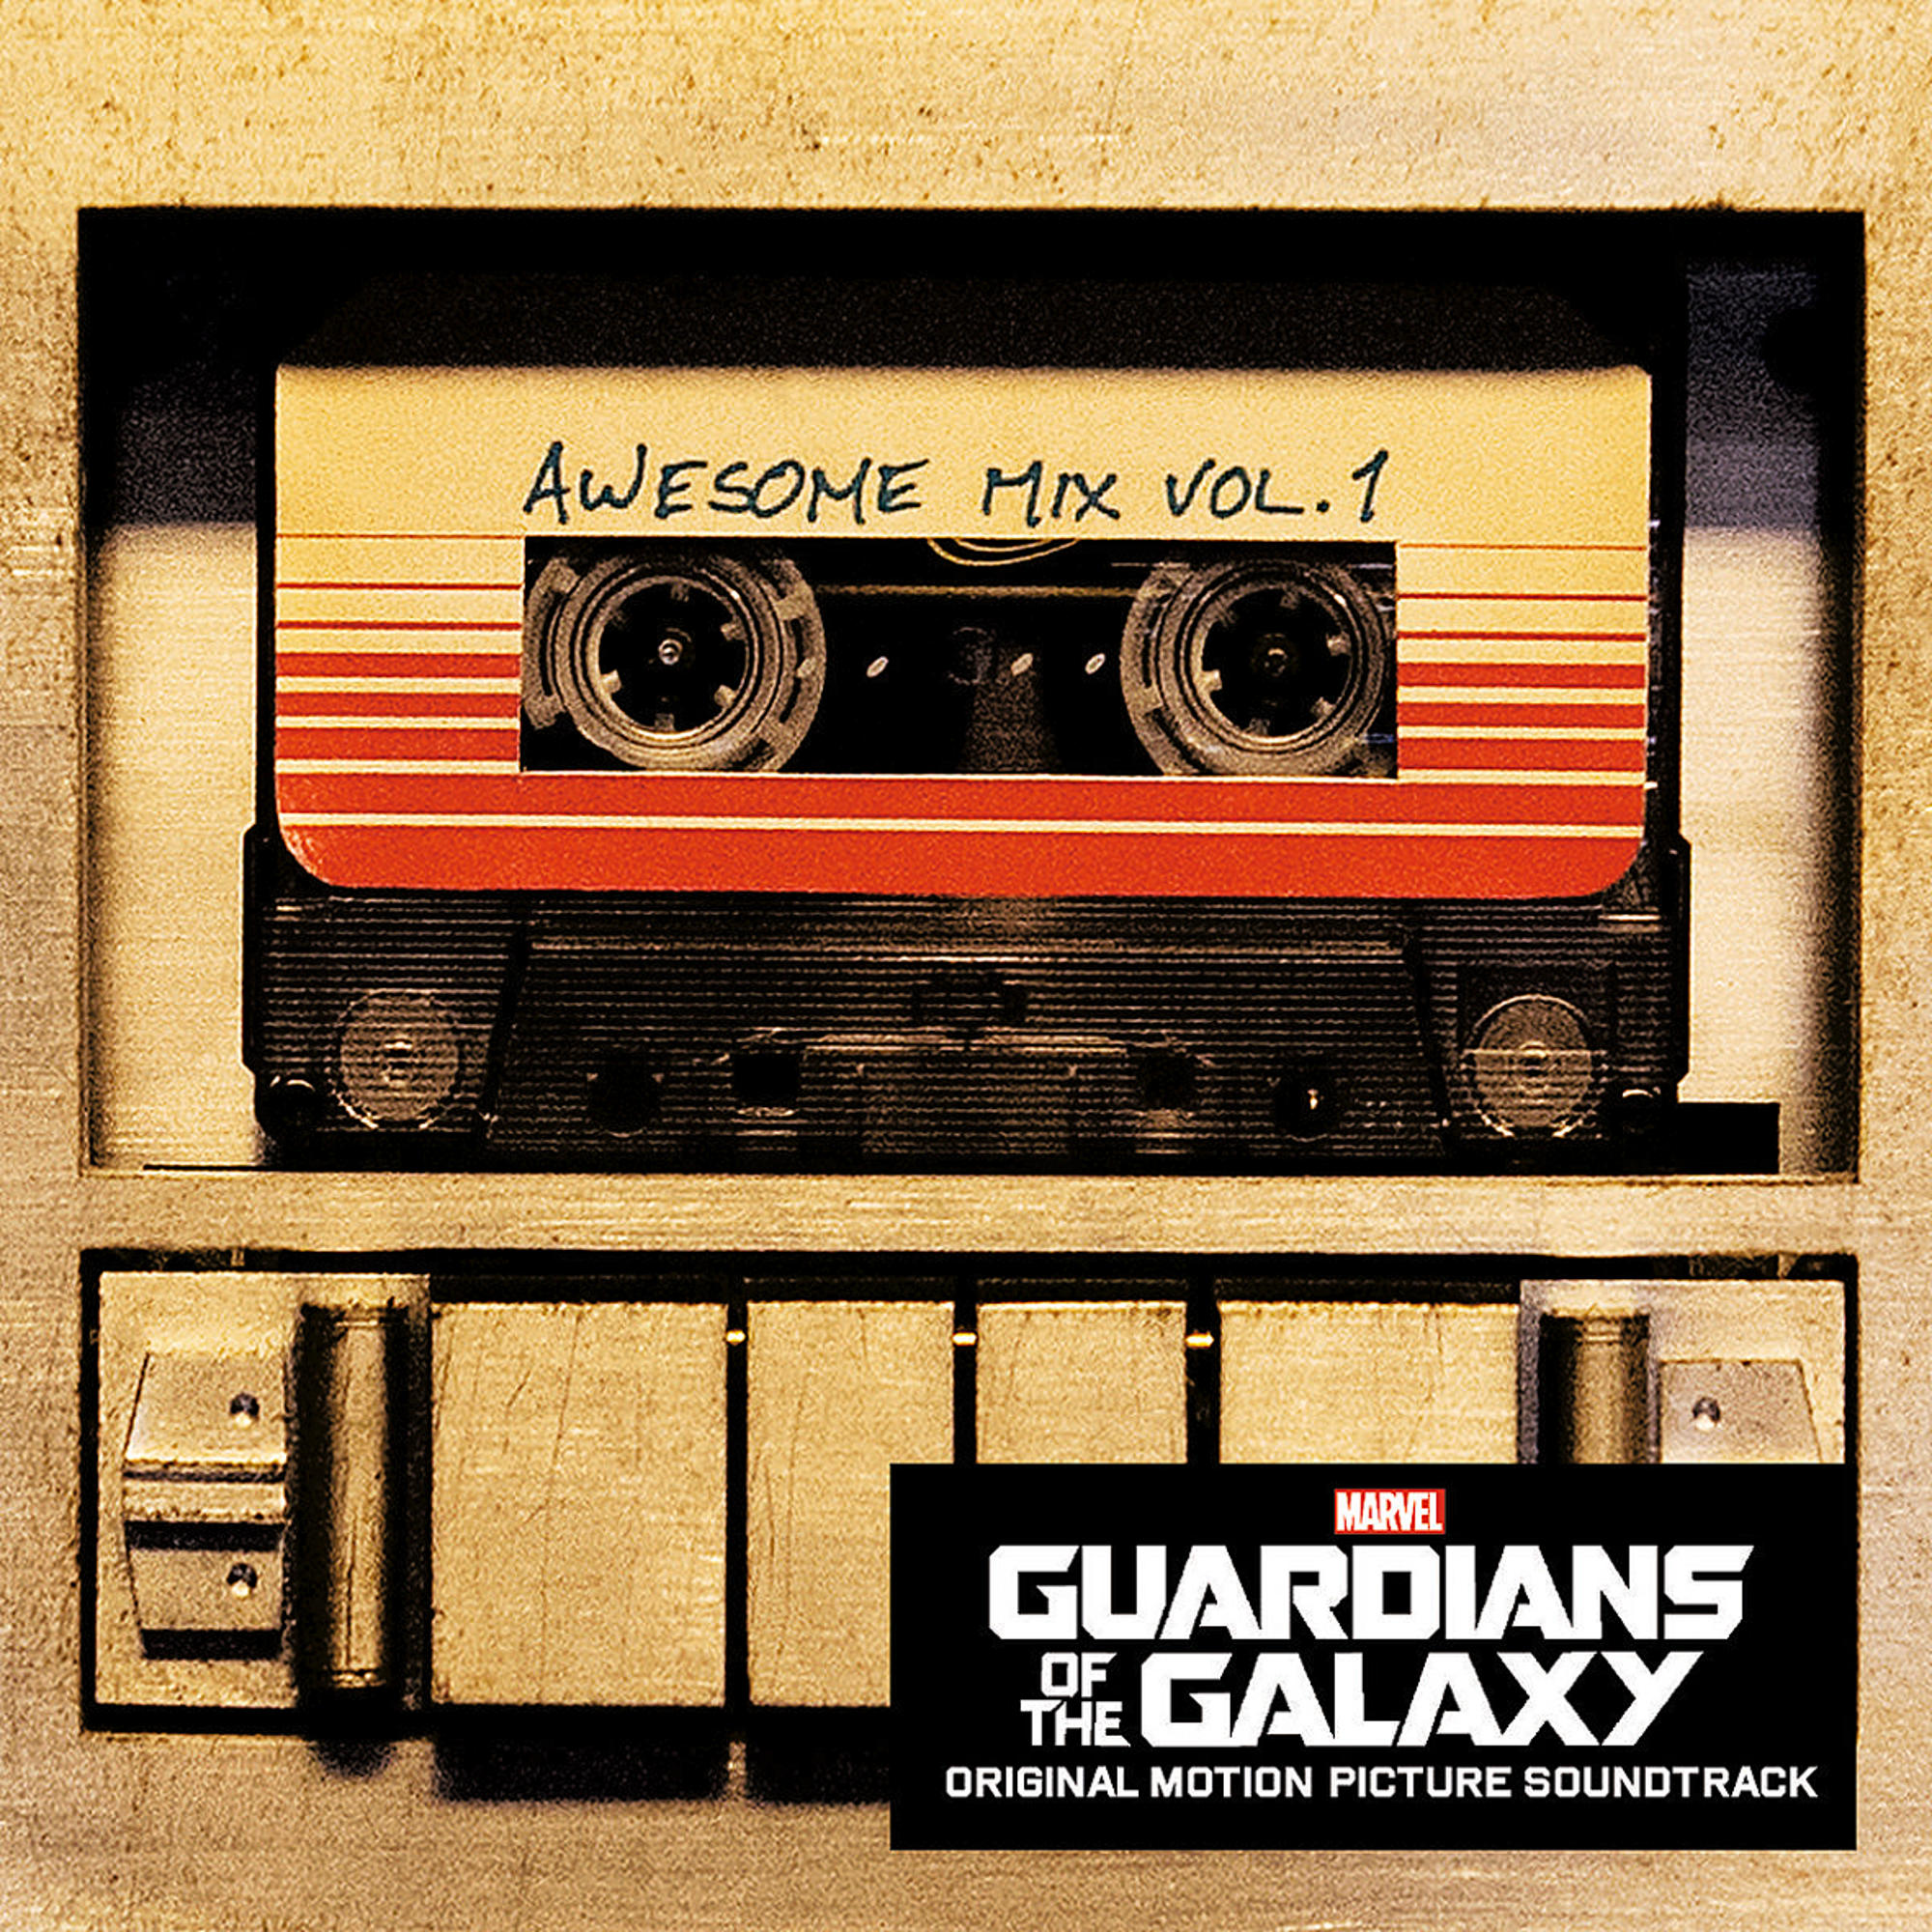 Of Mix (Vinyl) Galaxy: Awesome Guardians Vol.1 The VARIOUS - -